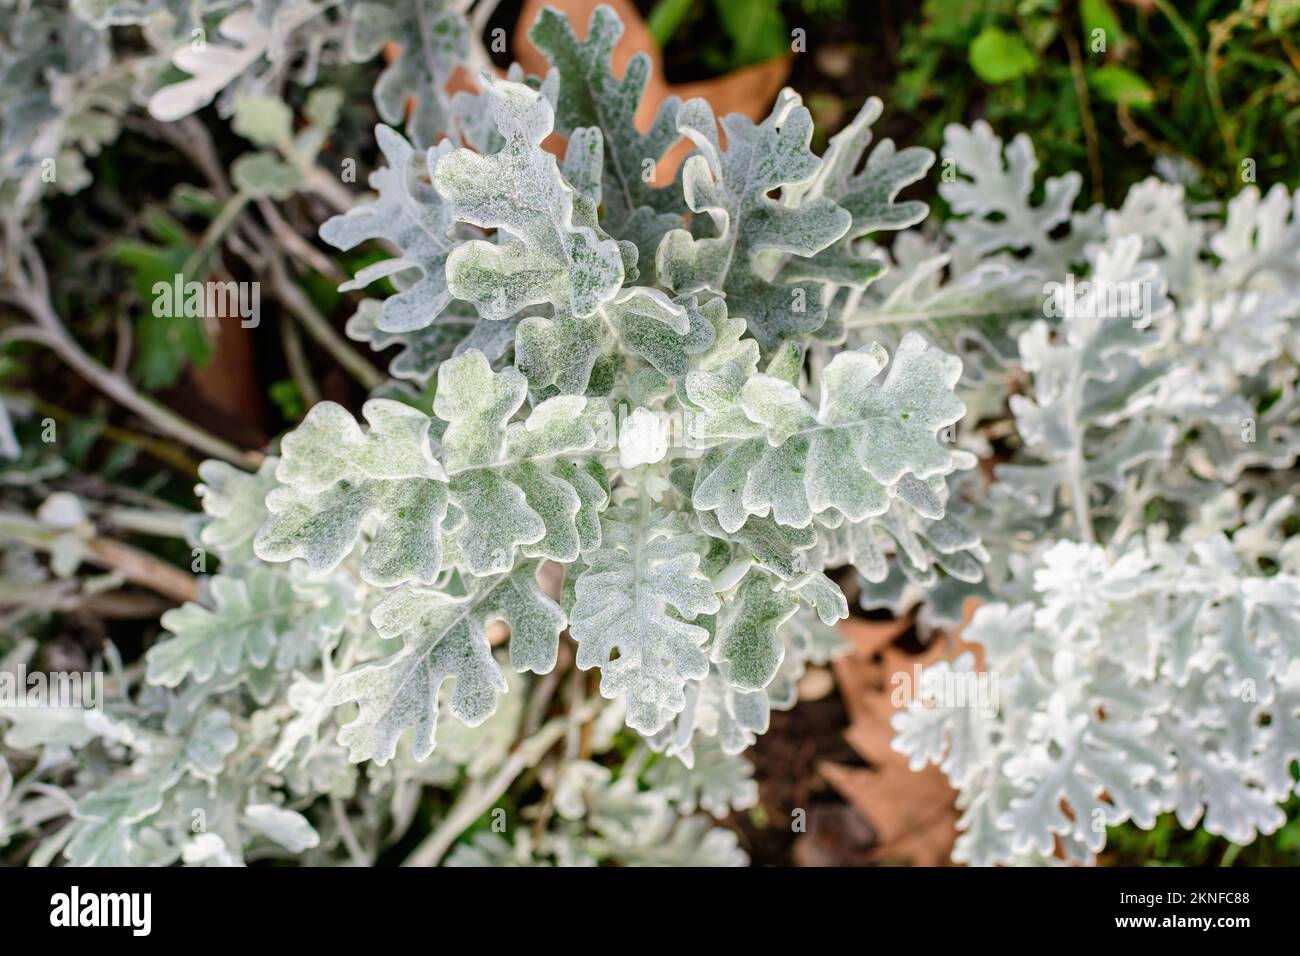 Small leaves of Jacobaea maritima plants known as Senecio cineraria or silver ragwort in a garden in a sunny autumn day, beautiful outdoor floral back Stock Photo